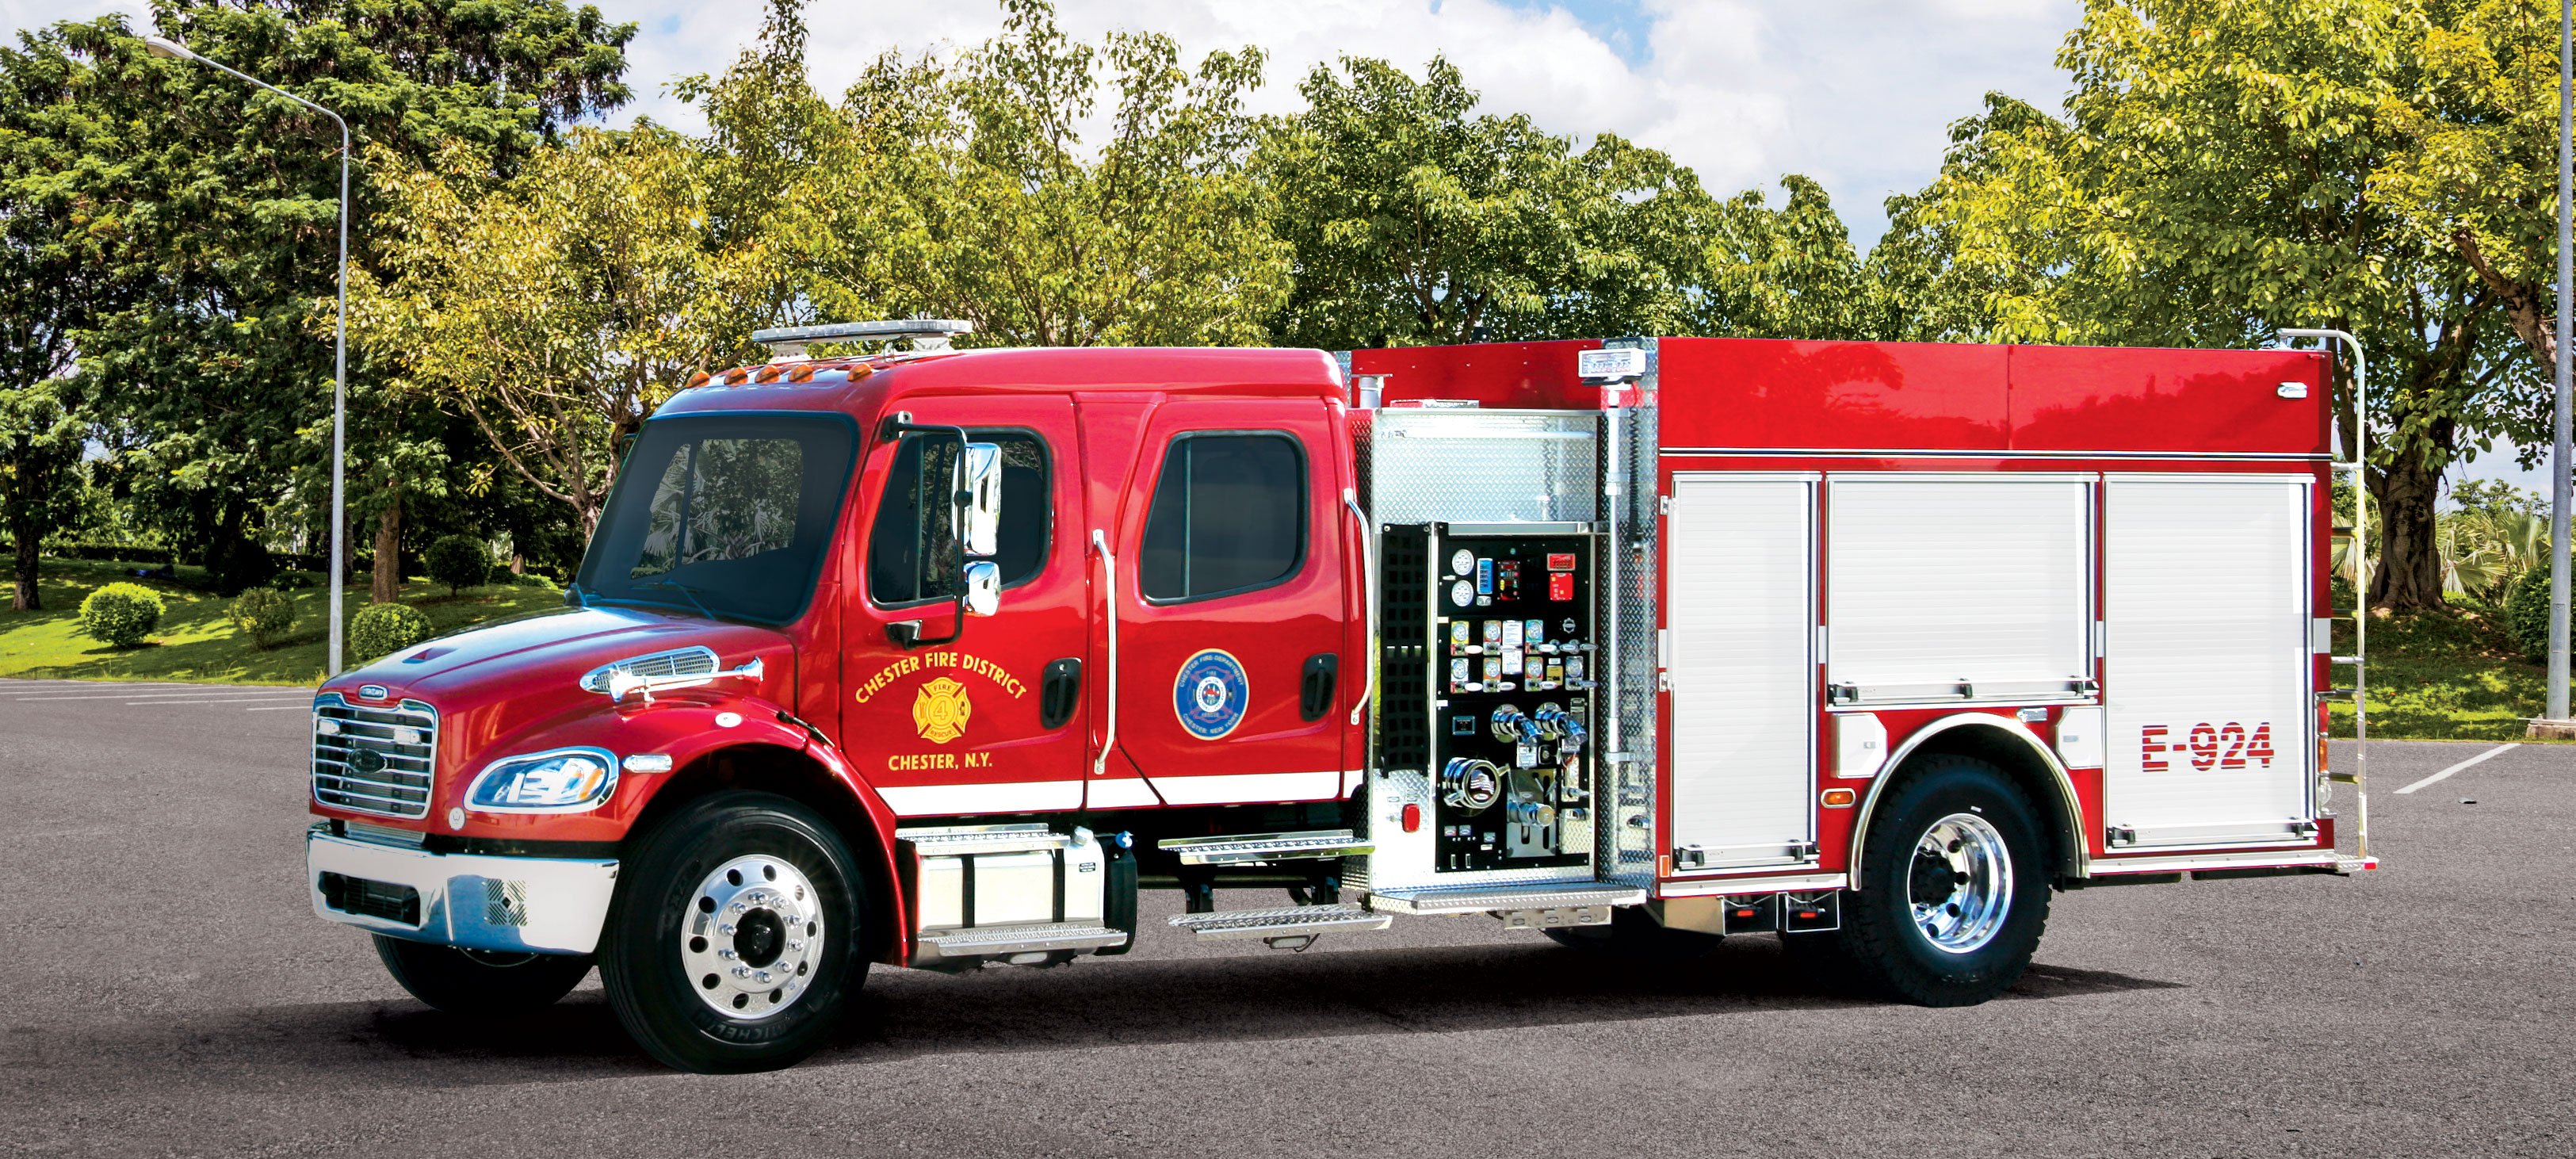 Pierce BX™ Pumper parked outside in a parking lot surrounded by trees on a sunny day. 